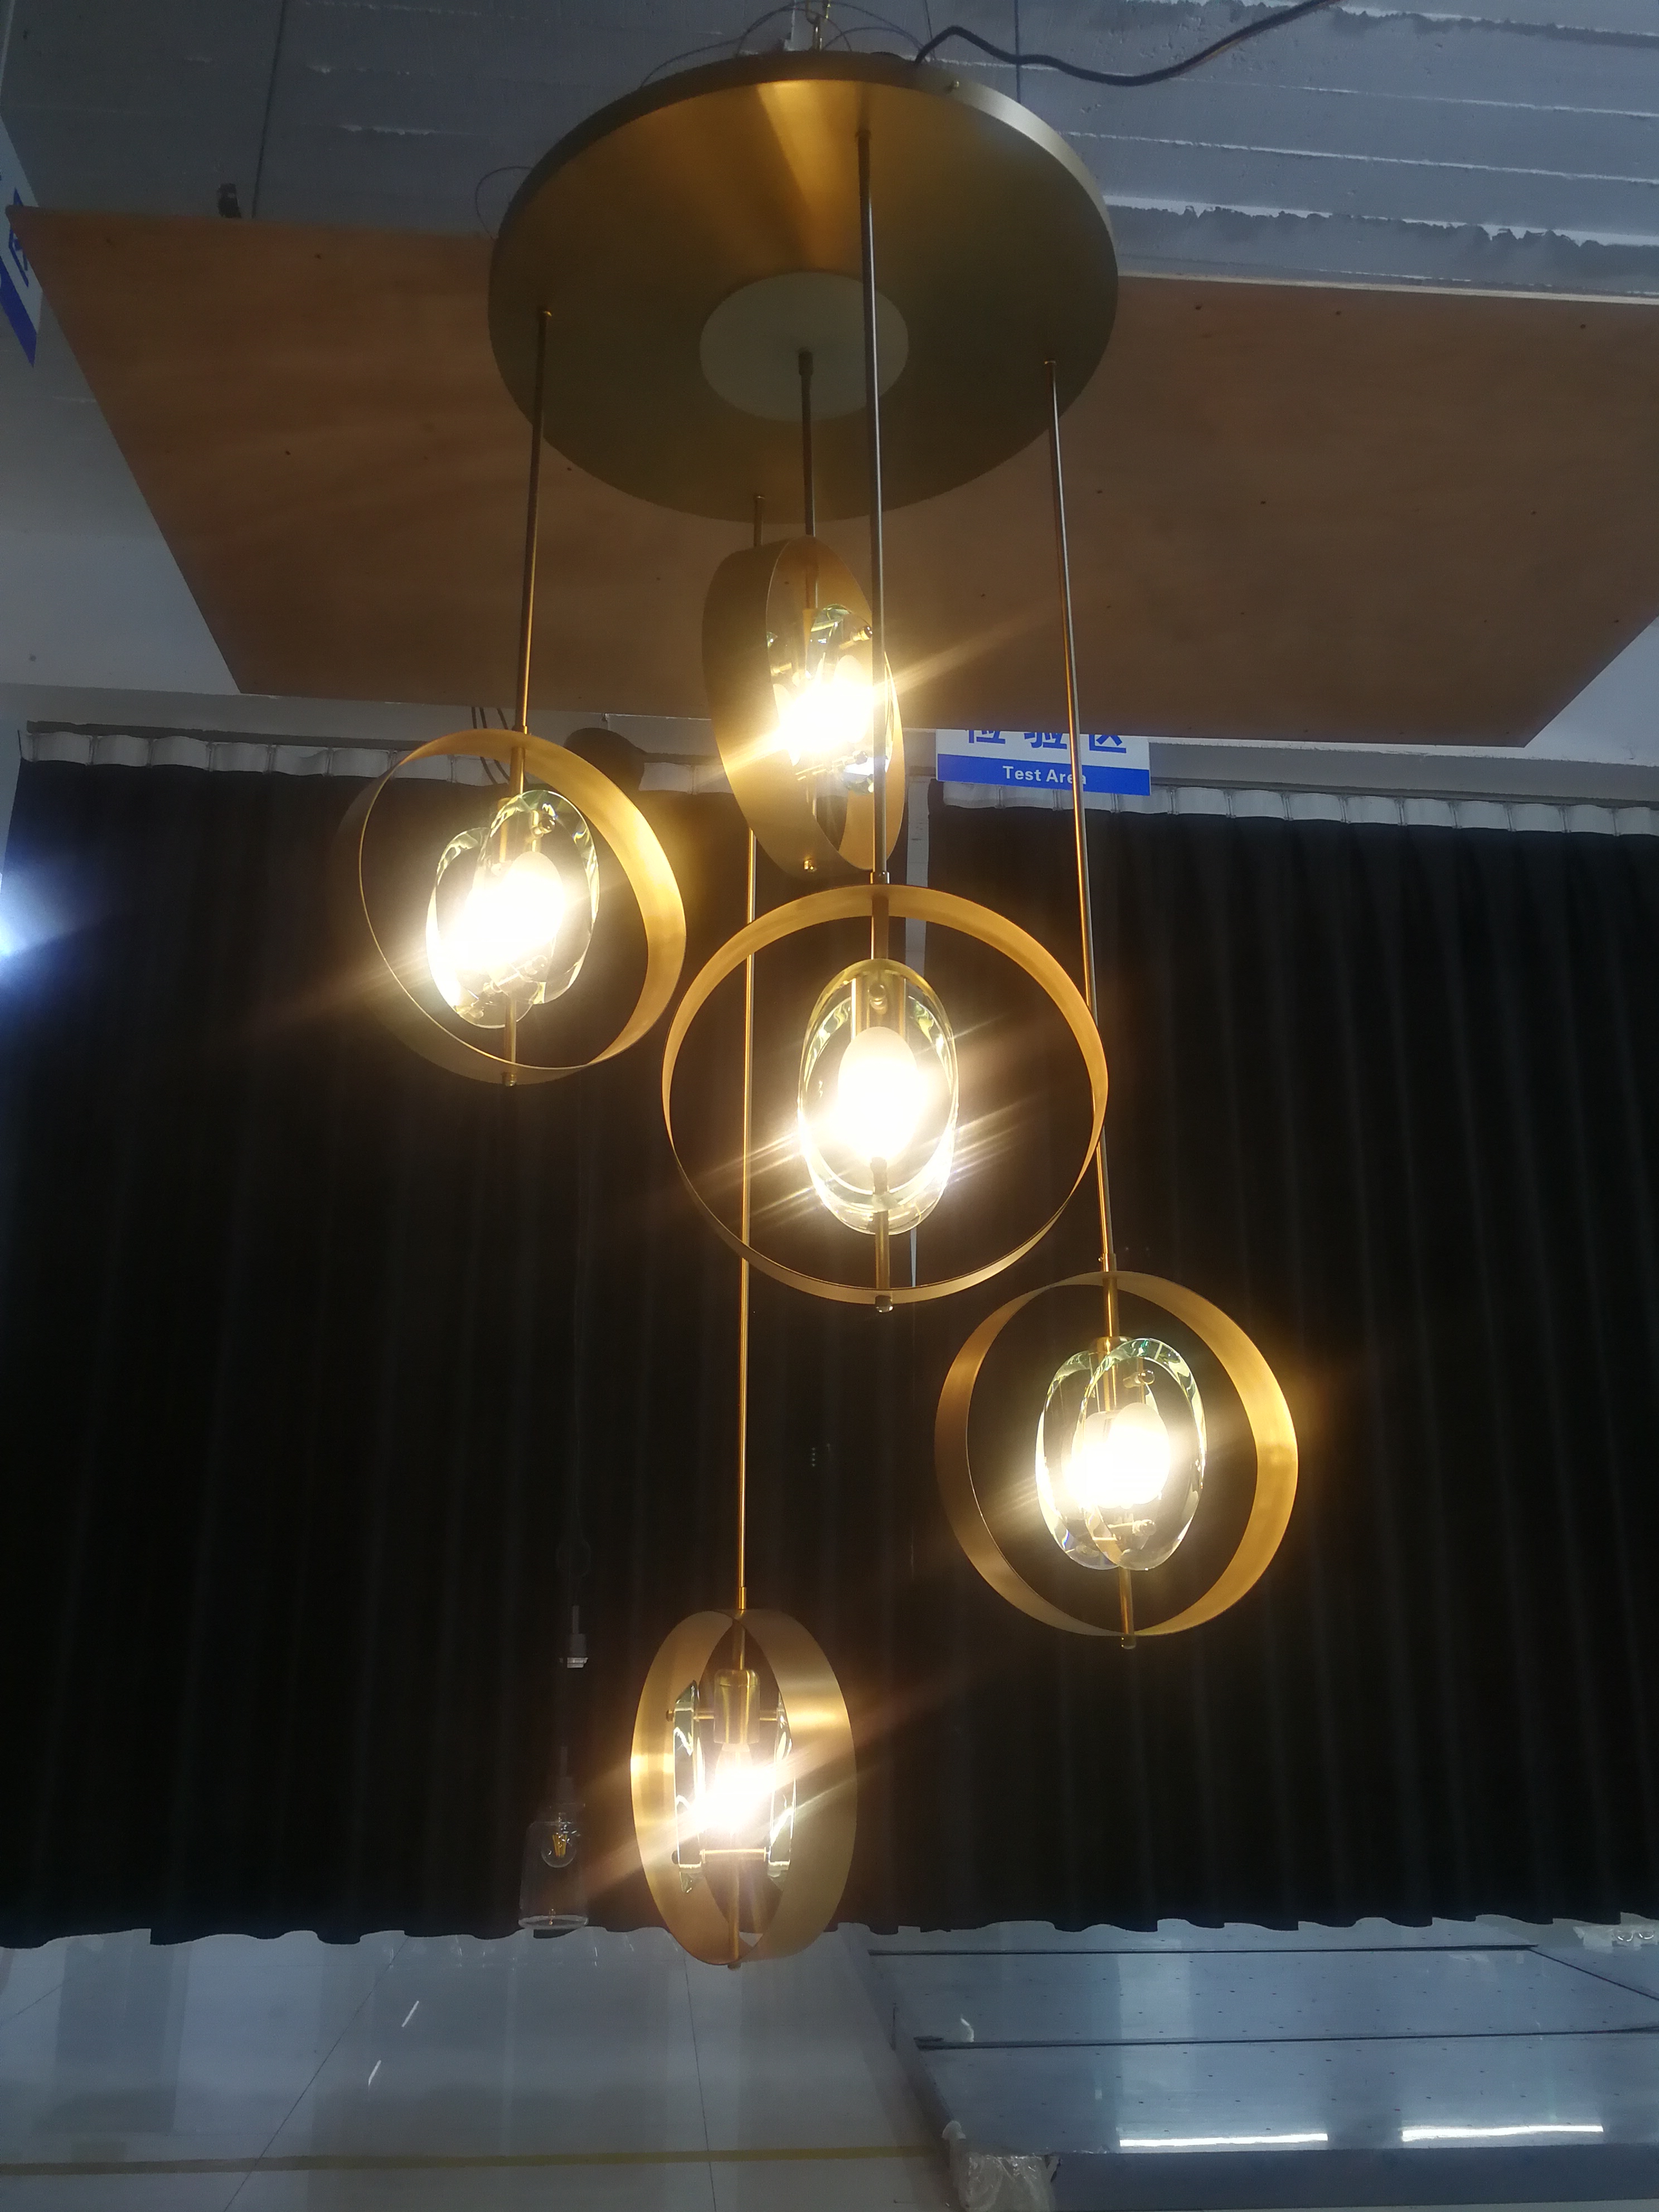 hotel decoration stainless steel glass ceiling lamp (KP06313)